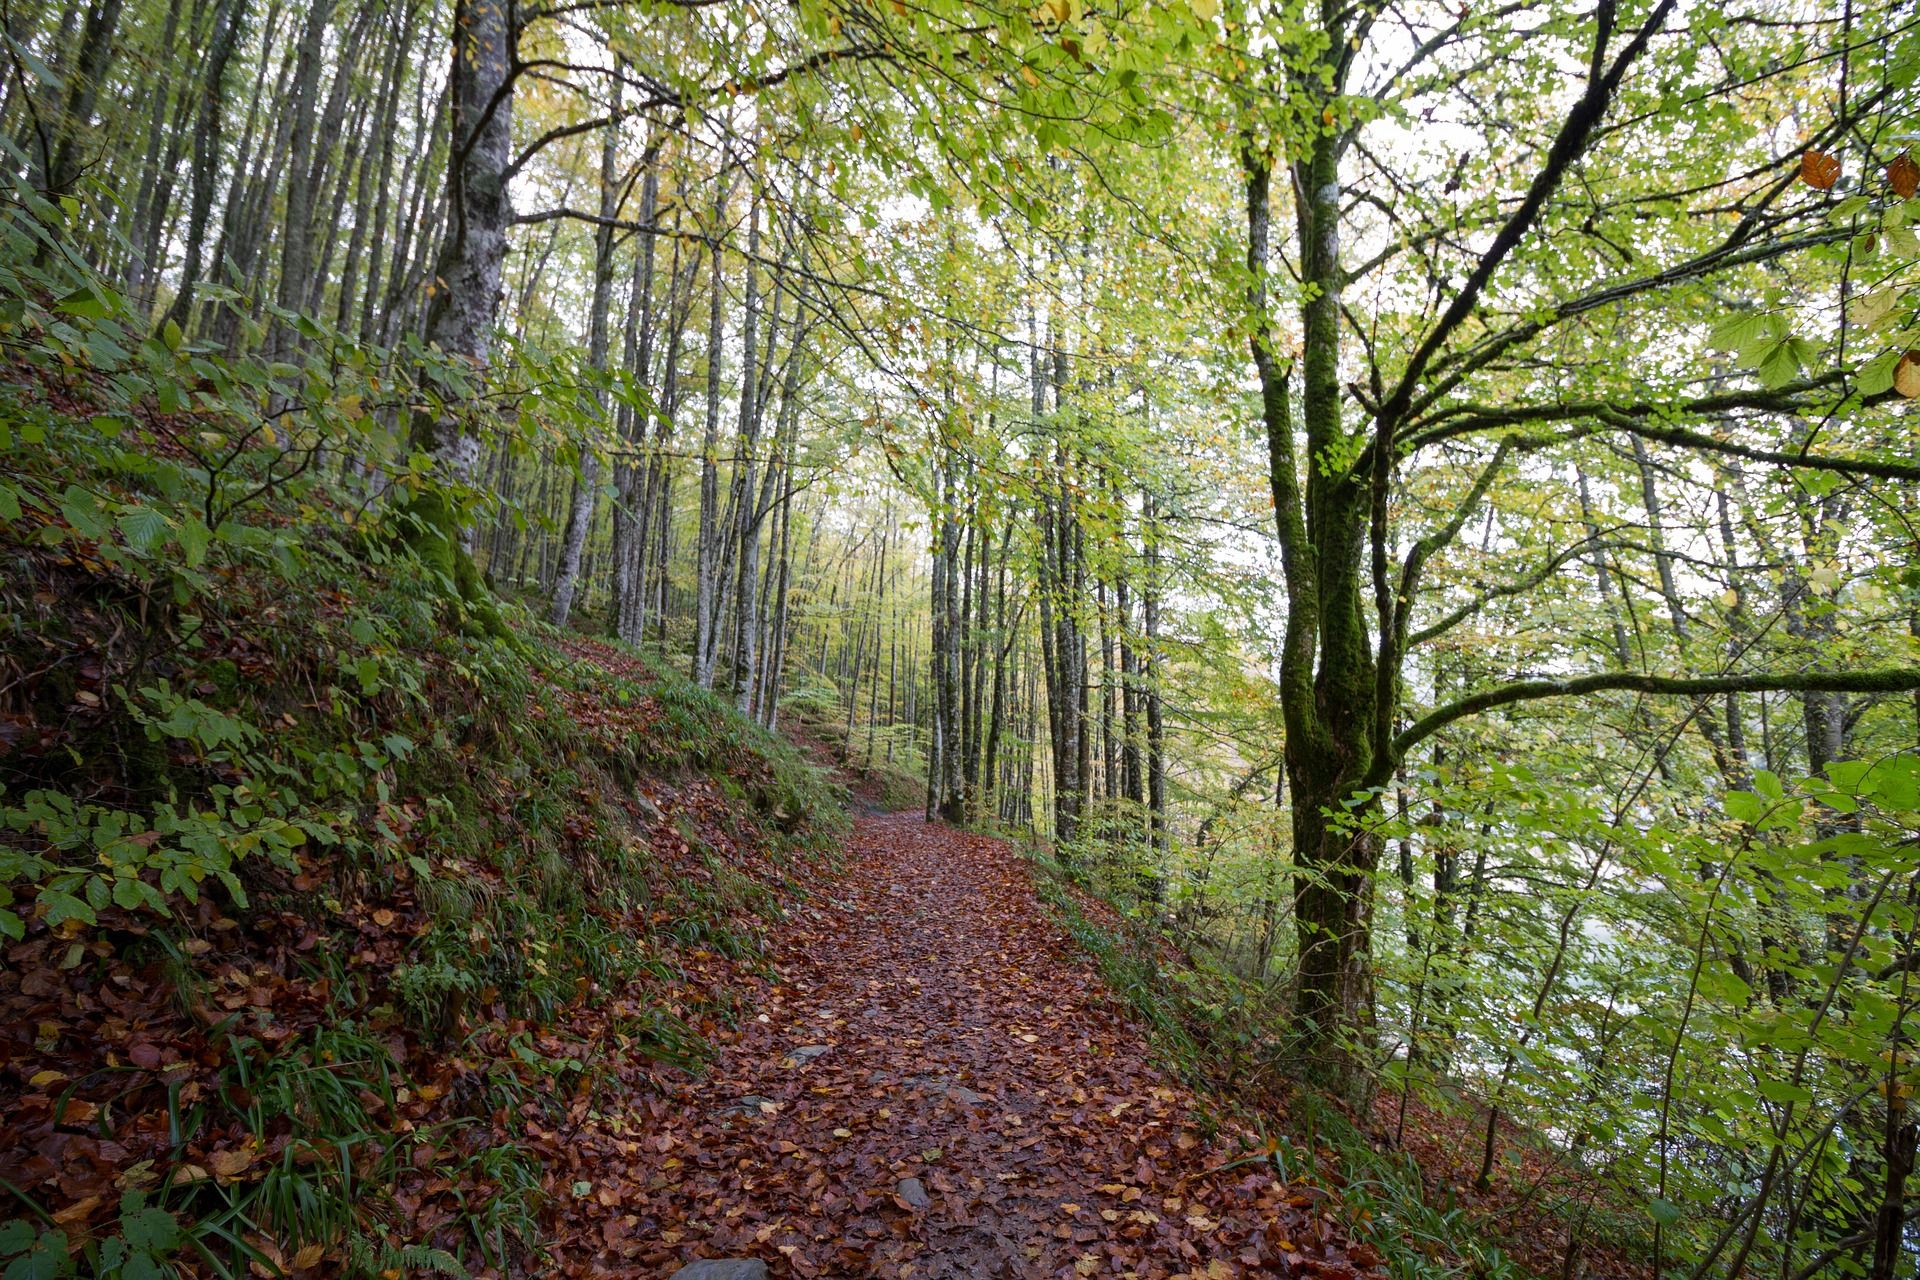 A path in the middle of the Irati forest in Navarre, Spain